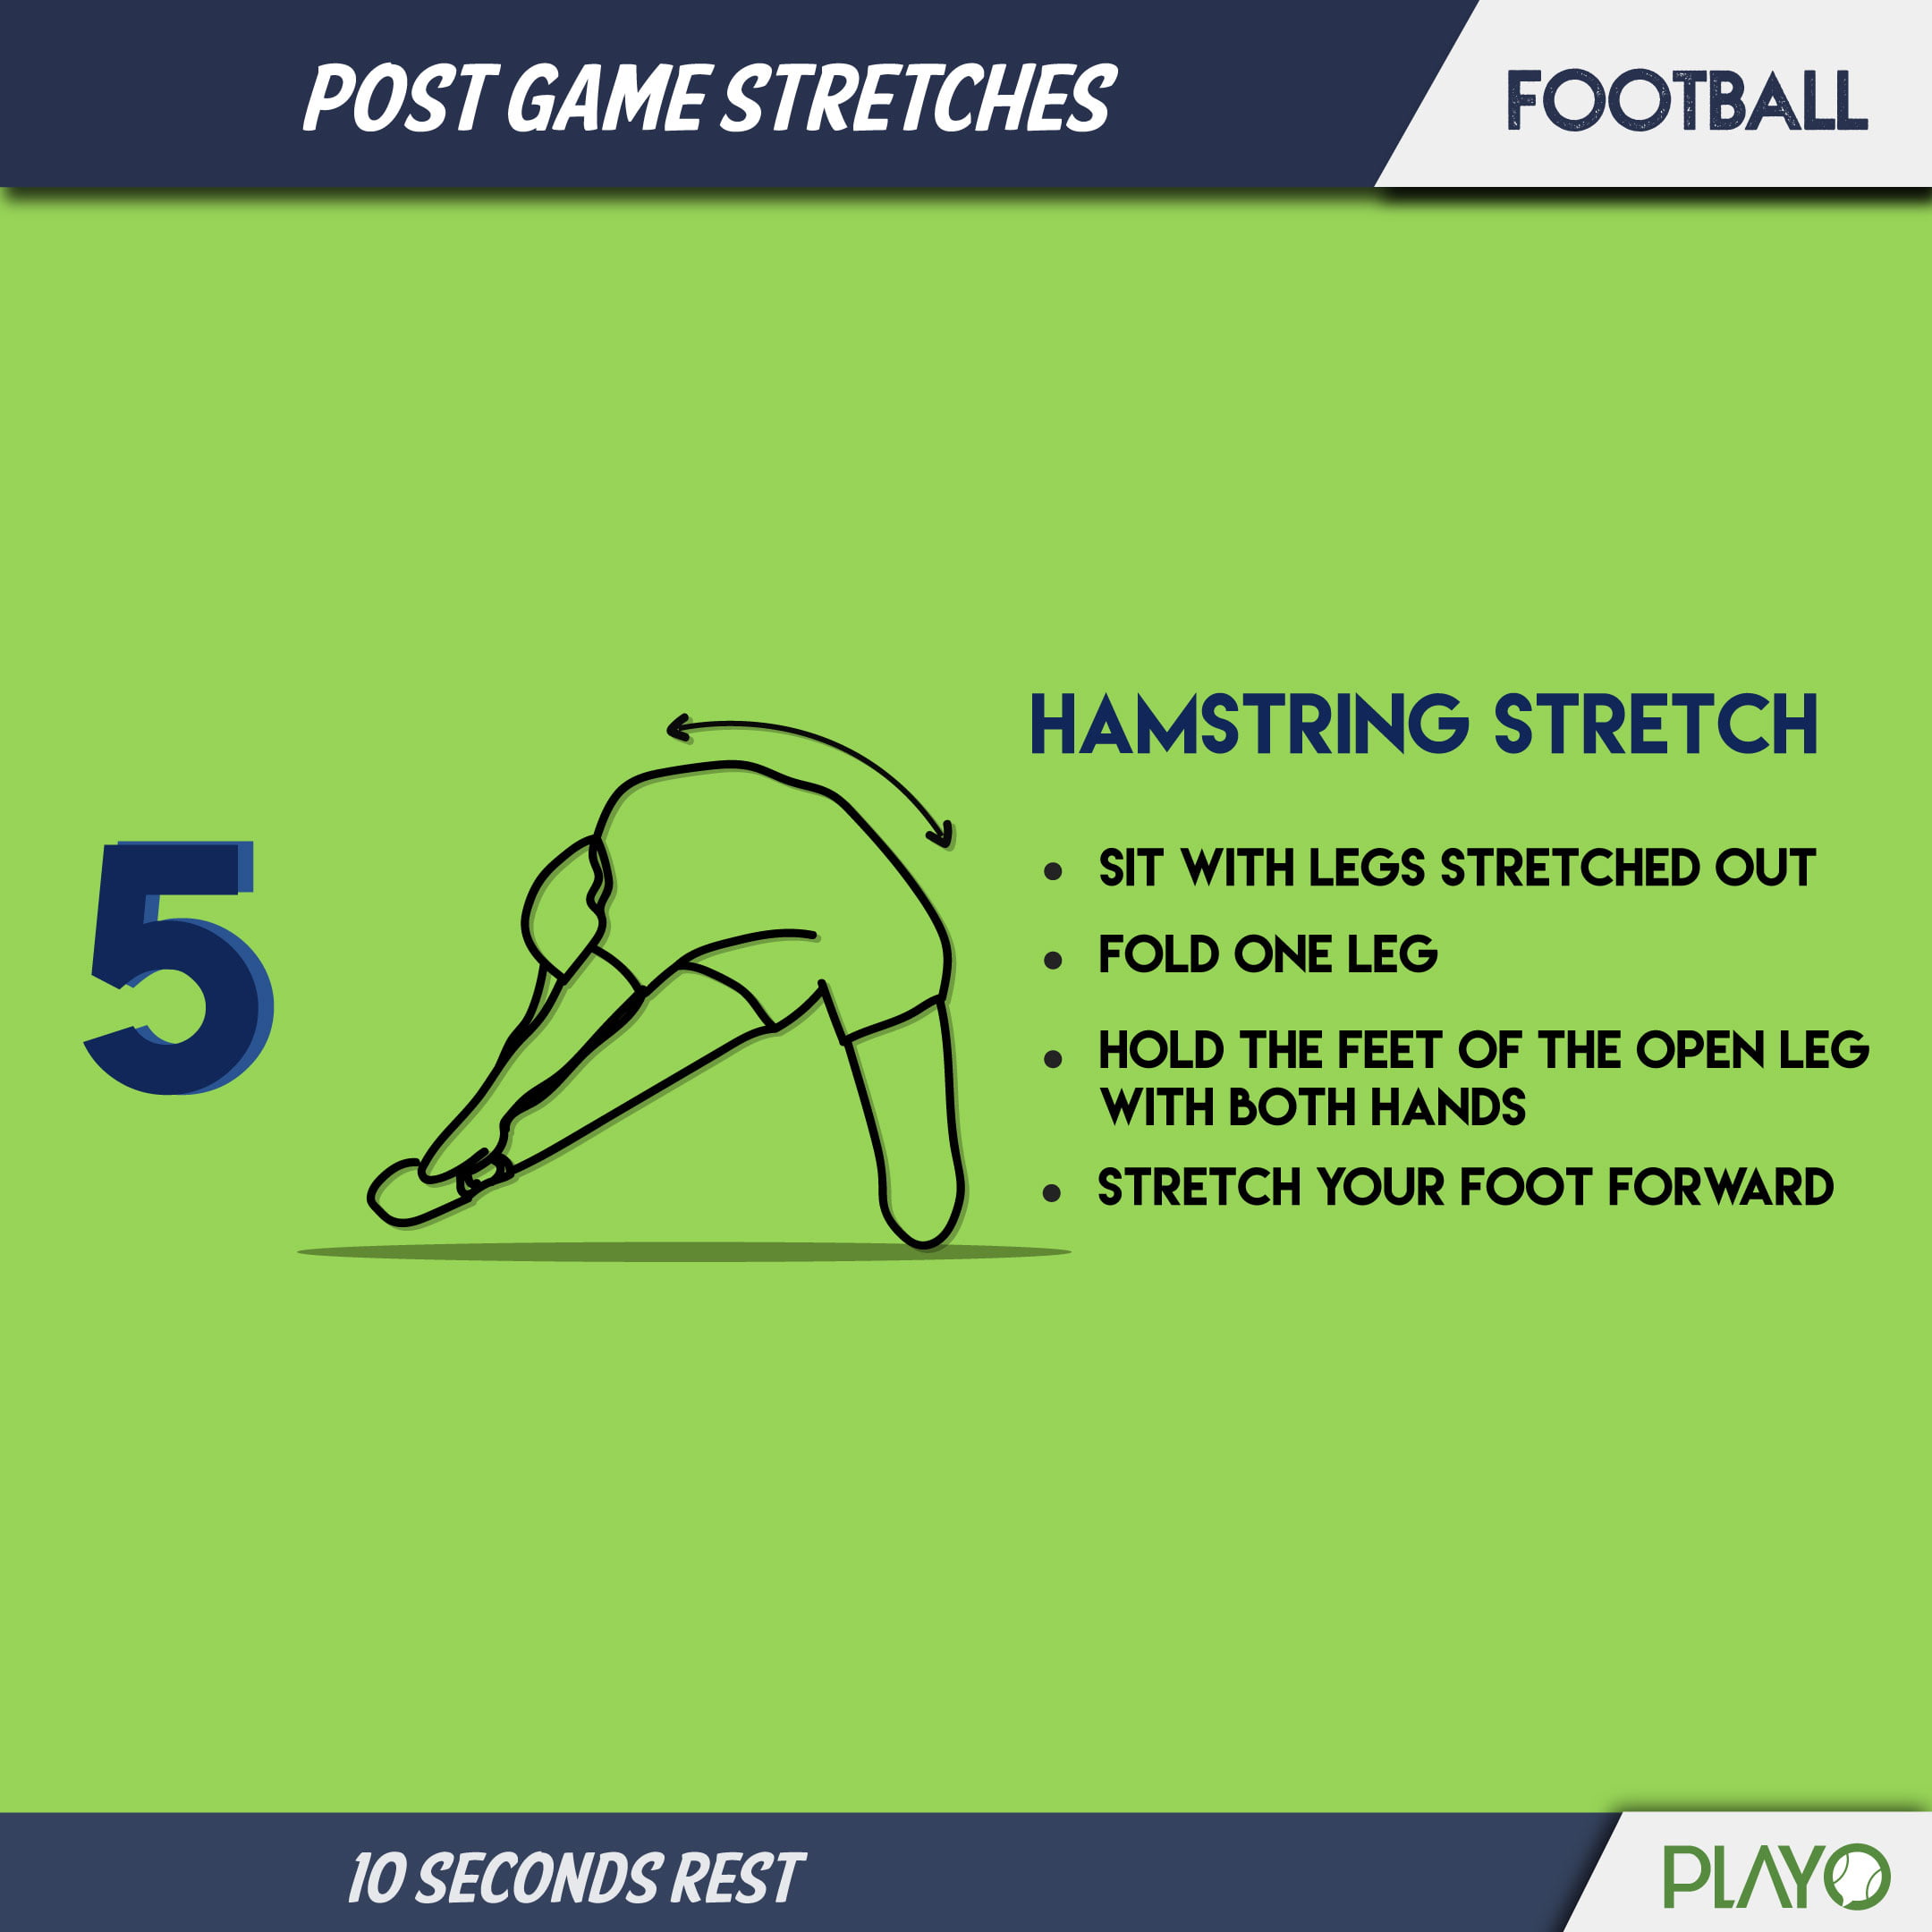 Hamstring stretch to cool you down after football